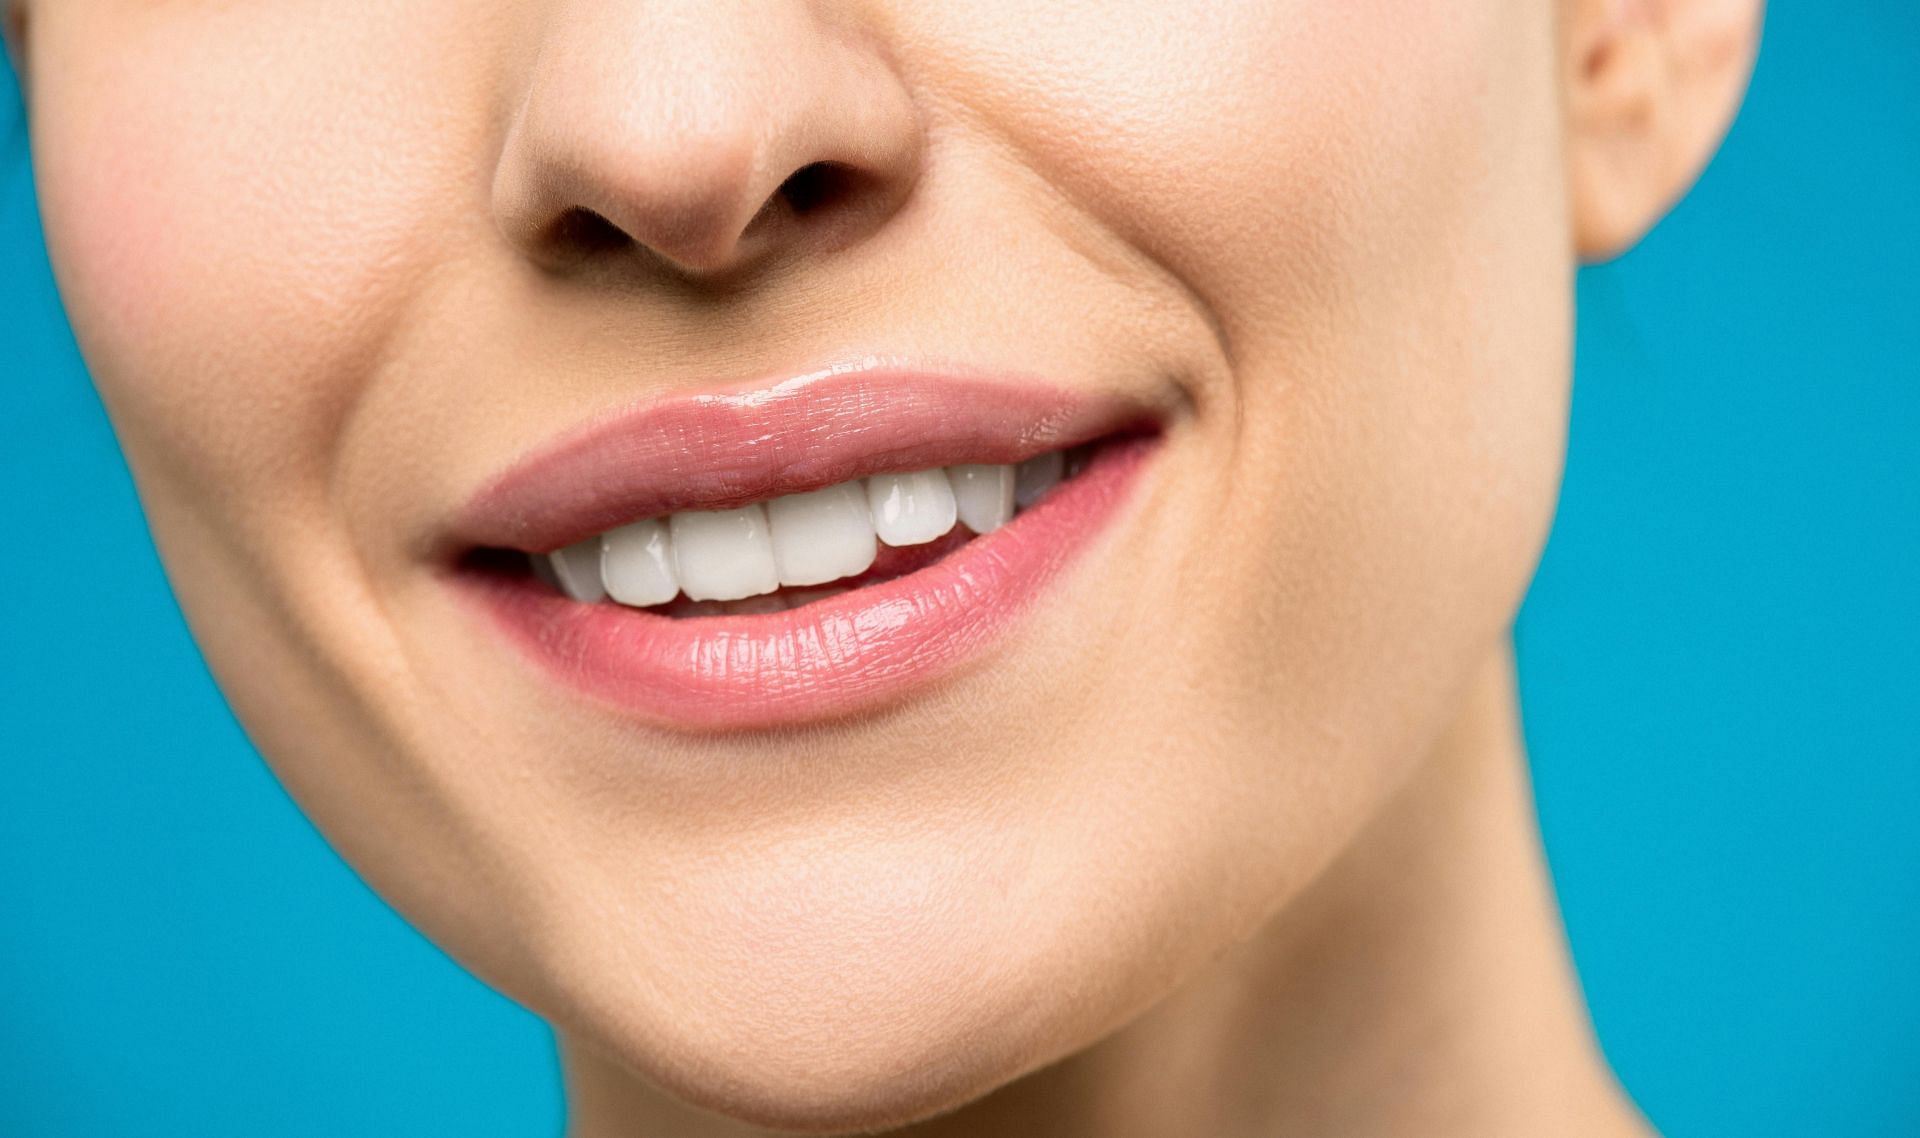 Tips on how to fix a chipped tooth (image sourced via Pexels / Photo by shiny)